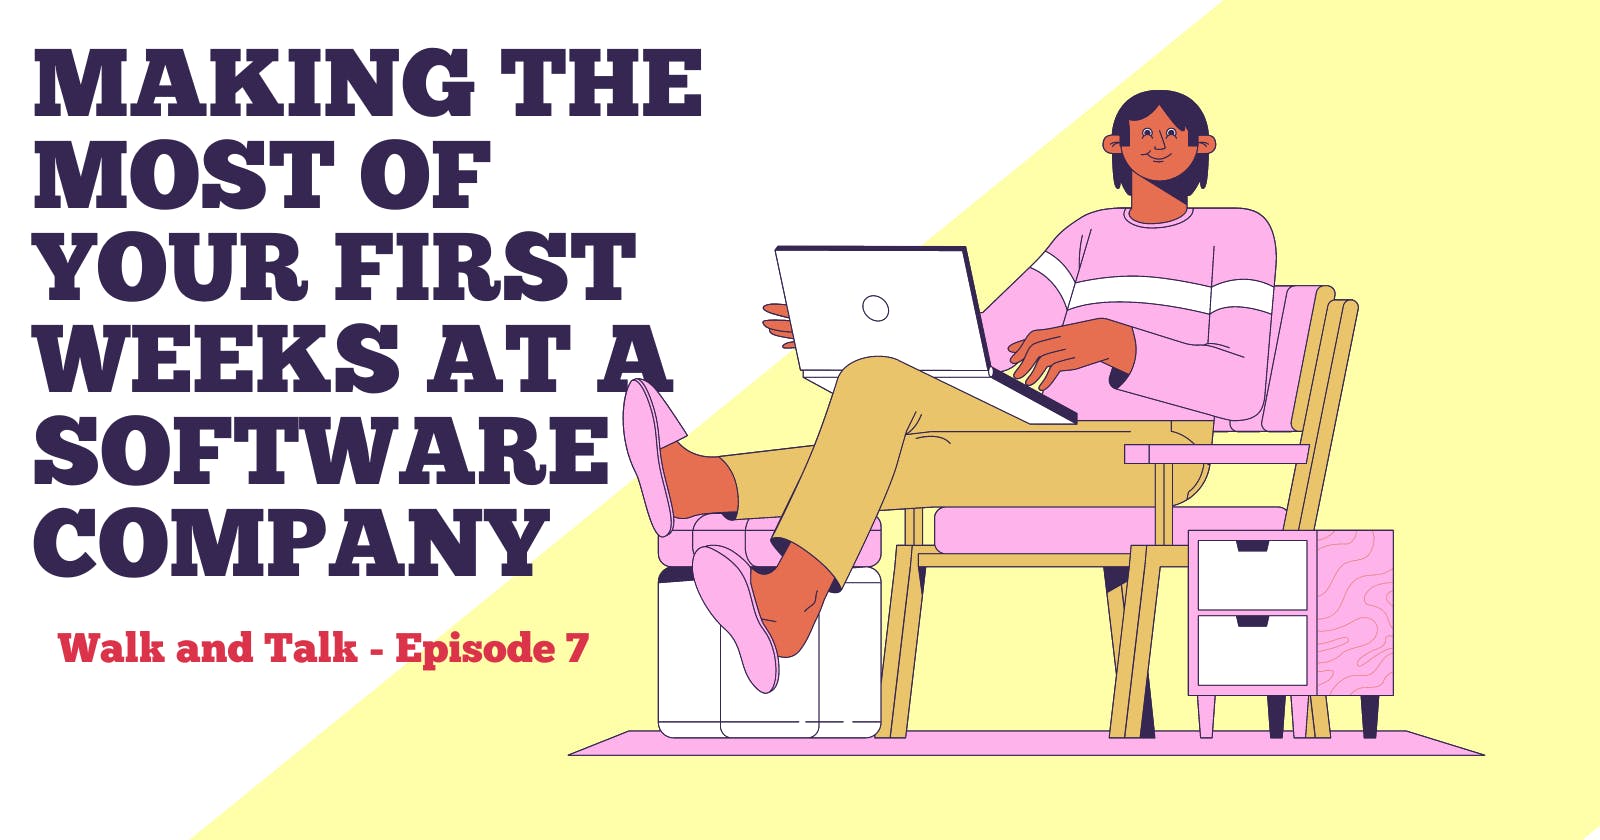 Making the Most of Your First Weeks at a Software Company